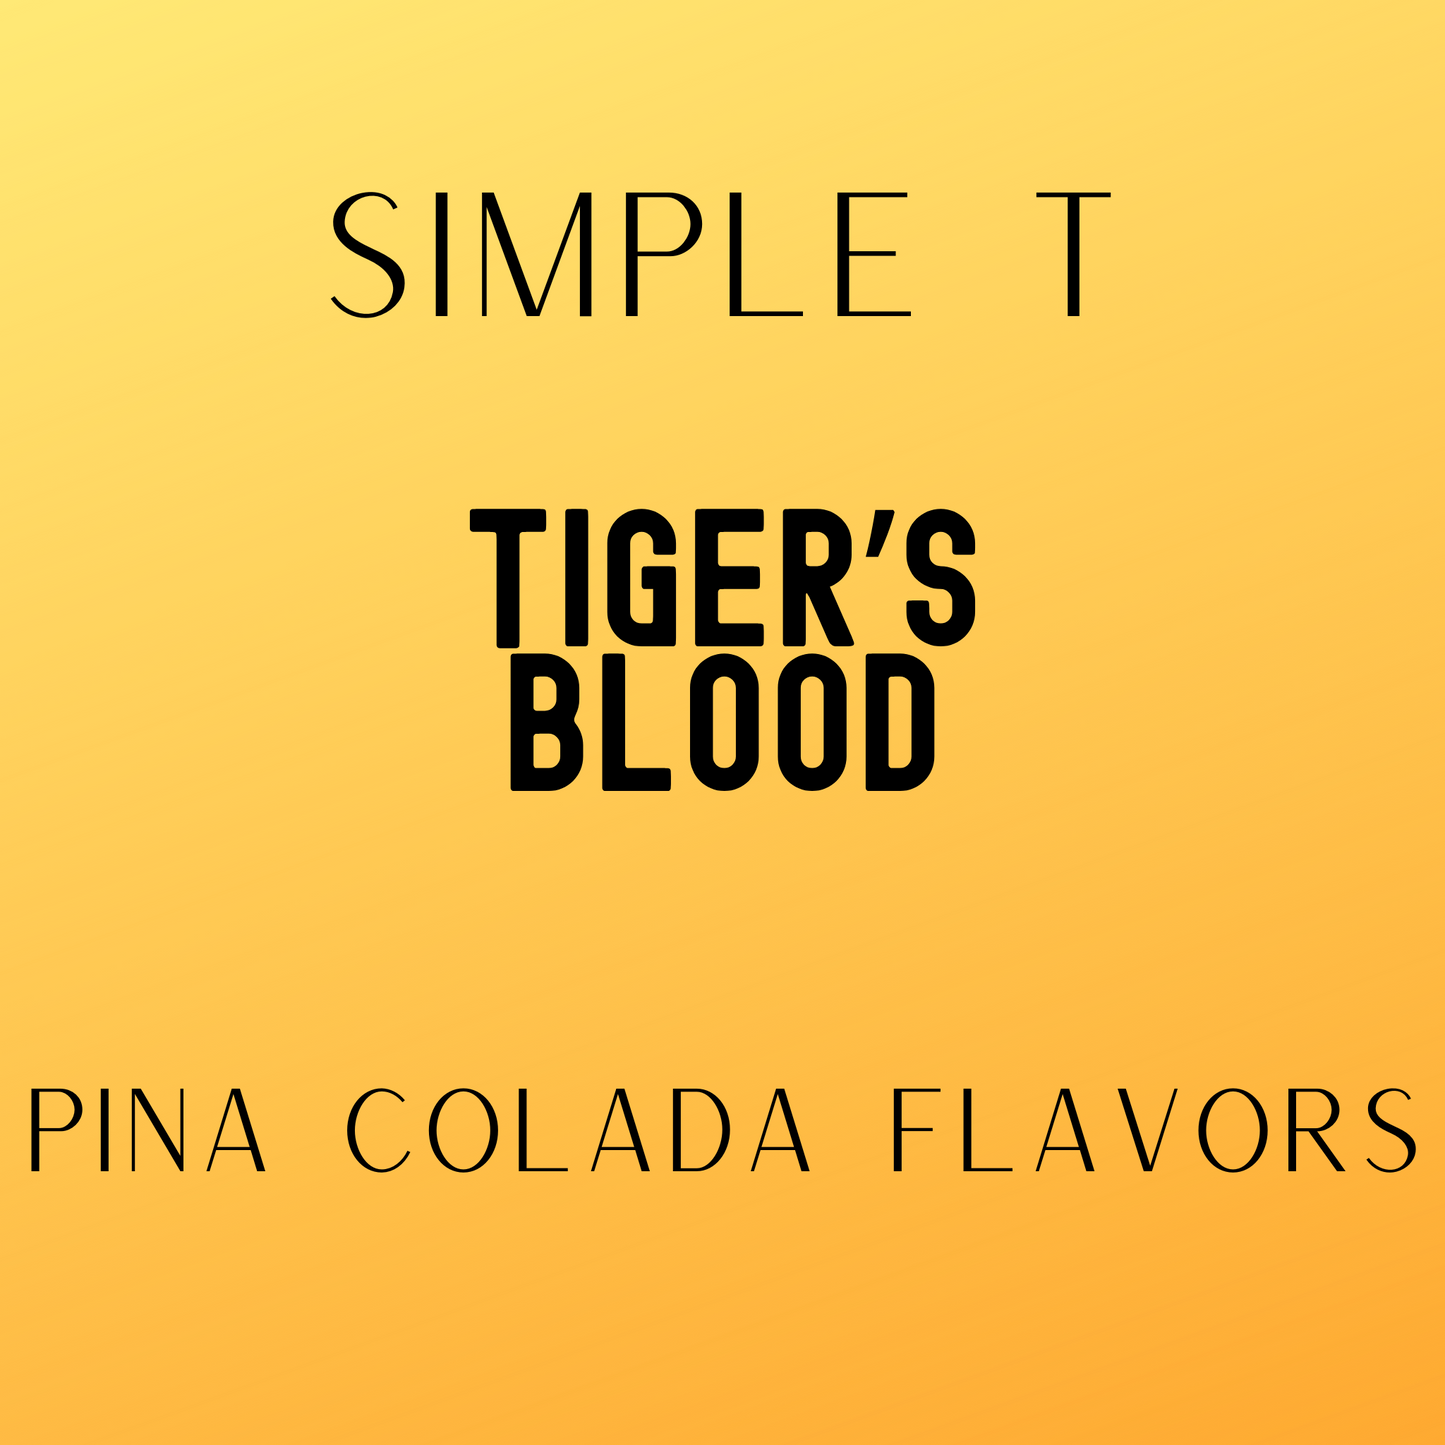 Tiger's Blood Simply T Packets (Pina Colada Lovers)